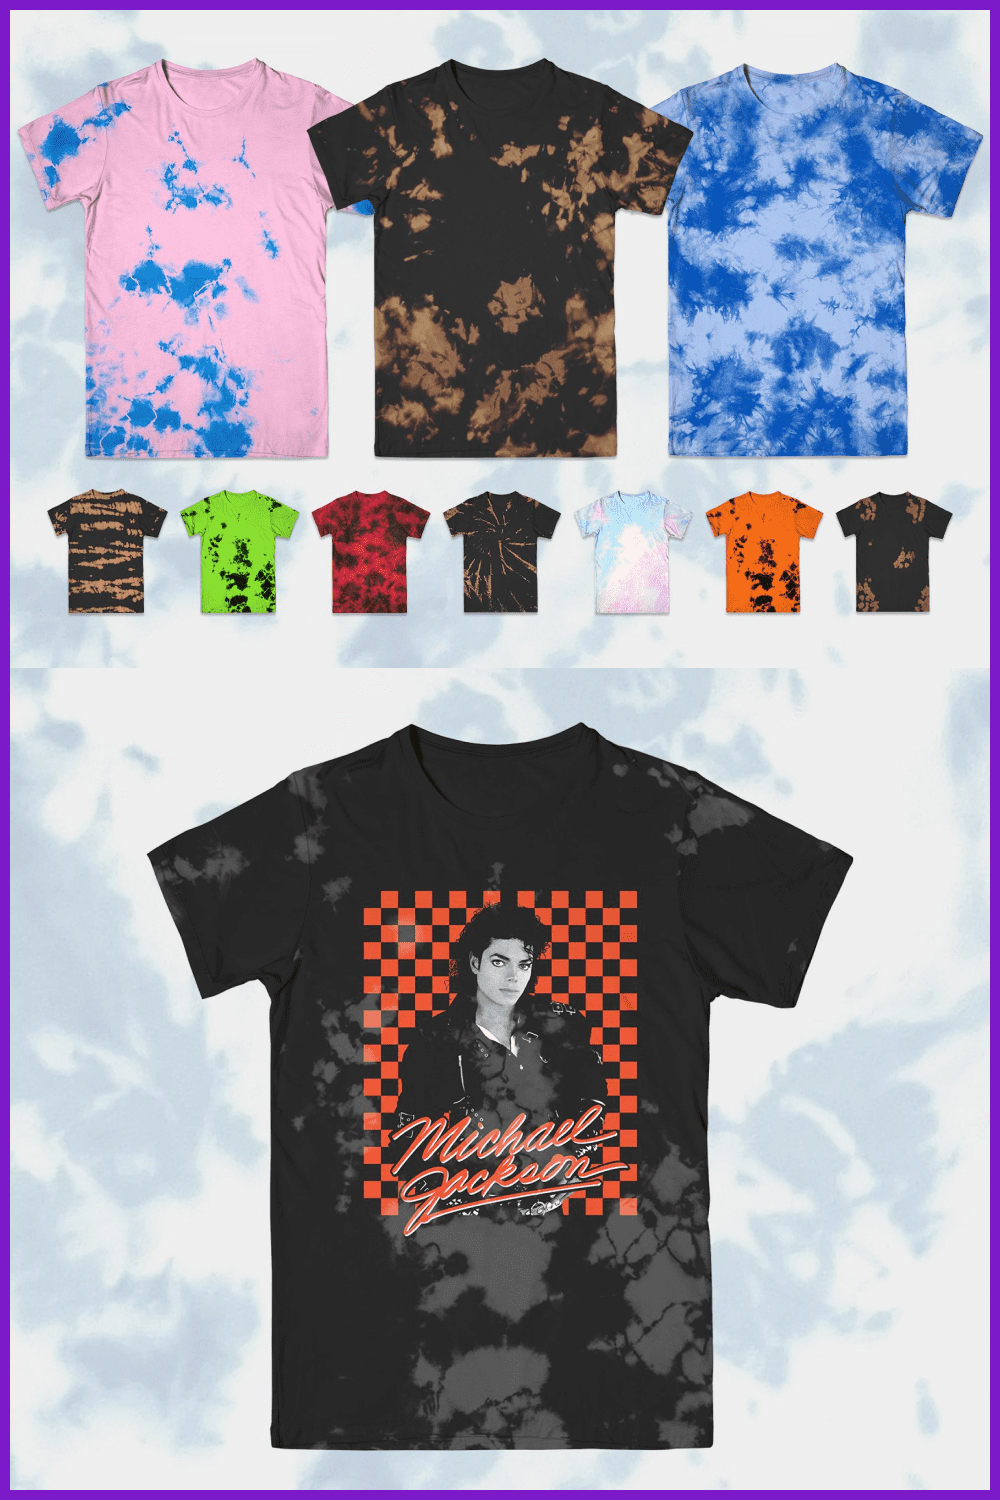 T-shirts in bright color combinations and Michael Jackson print.